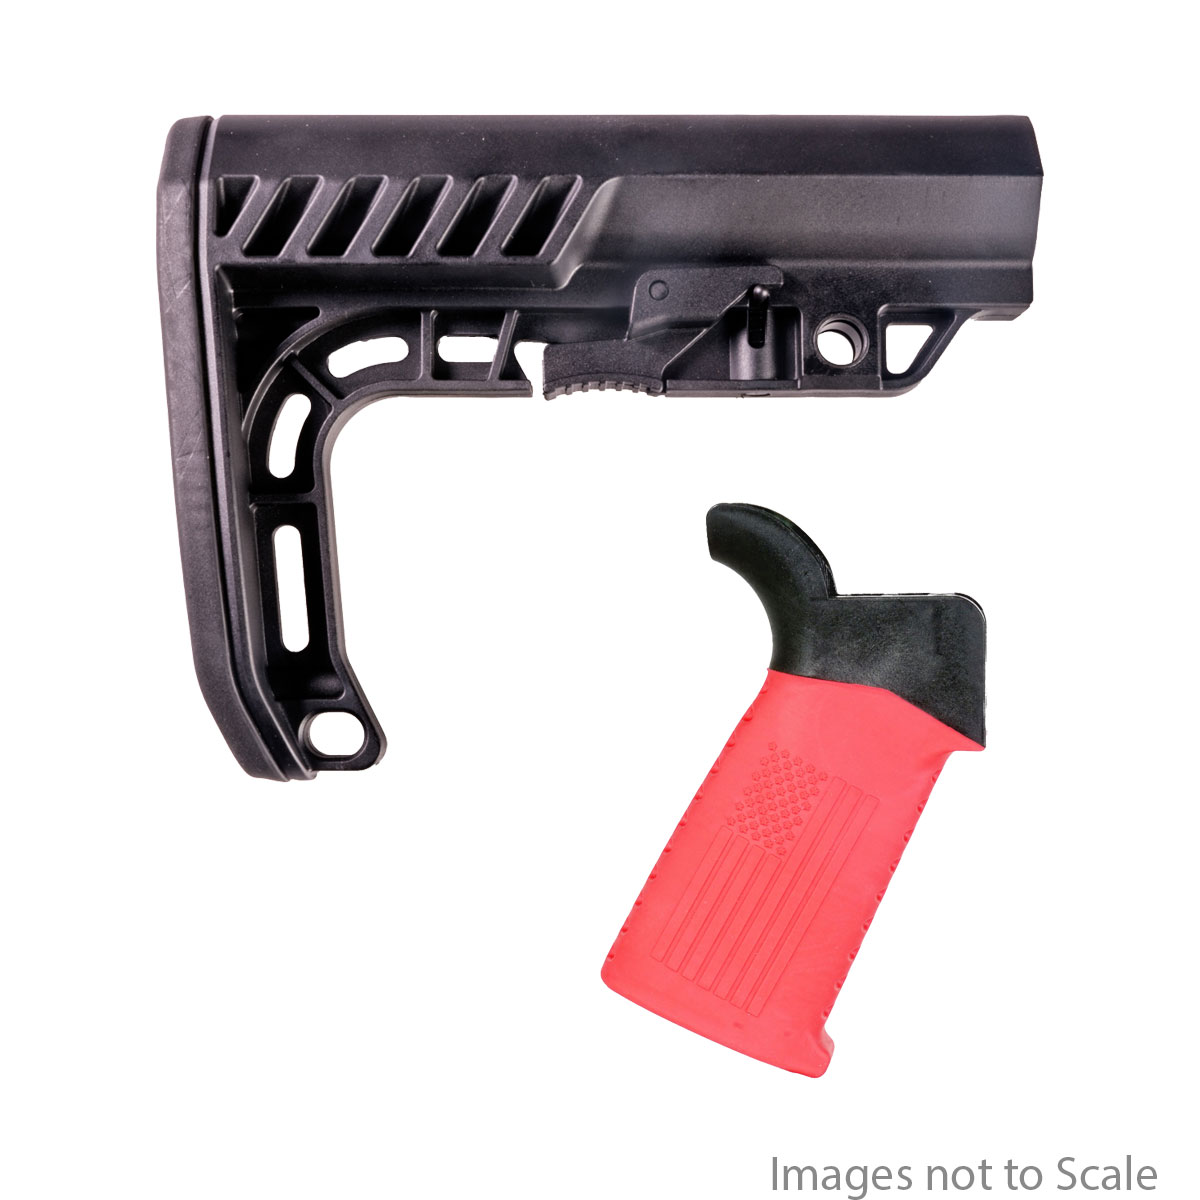 Furniture Upgrade Kit: Team Accessories Corp AR15 Grip Window Grip Flared  Flag/Ribbed Red  + Gauntlet Arms Minimalist AR-15 Stock